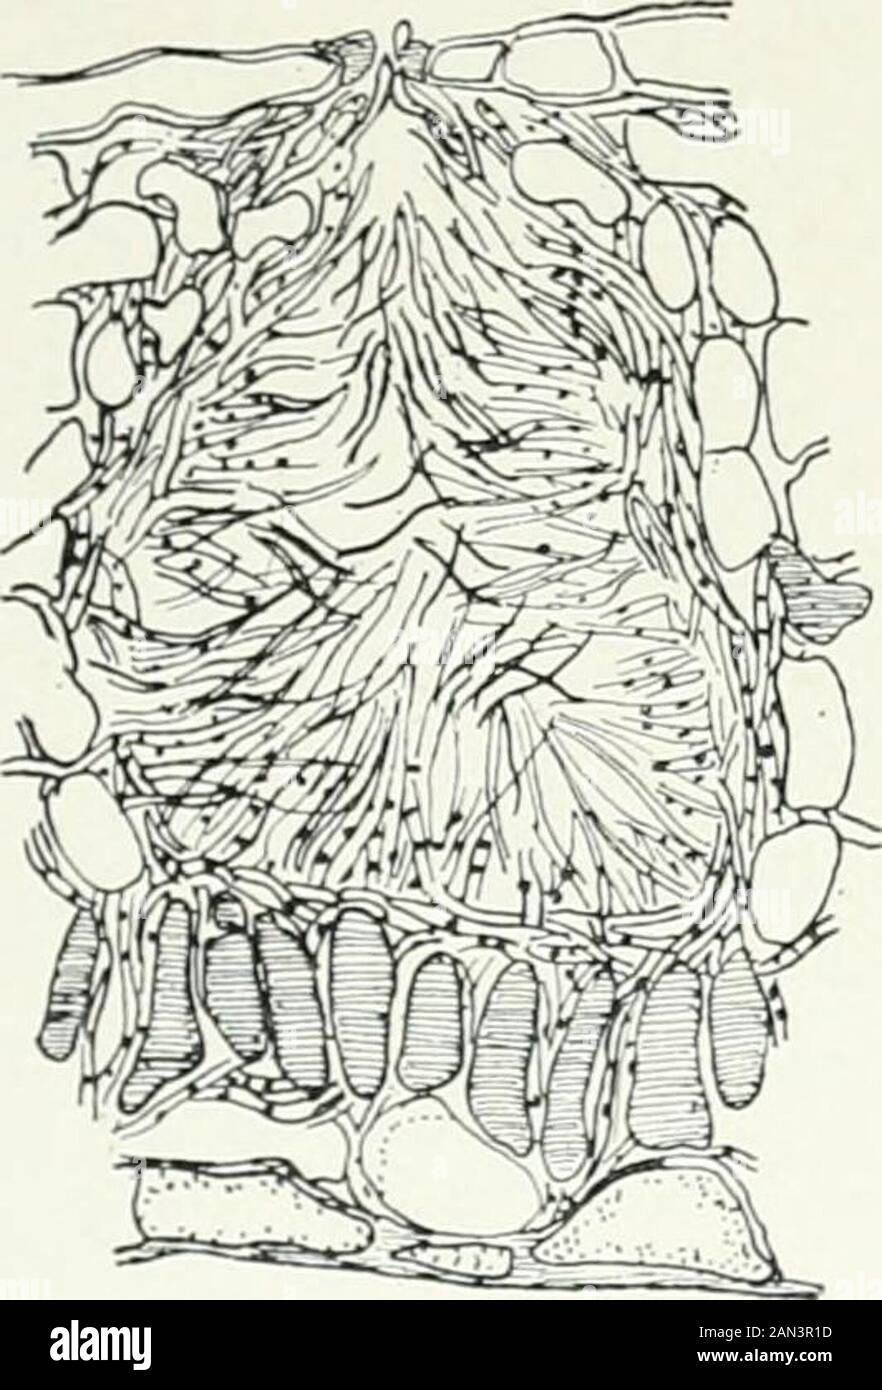 Fungi, Ascomycetes, Ustilaginales, Uredinales . he cell. All attempts to bring about the germination v] HYPOCREALES ?47 of these spermatia have failed, and no relation of any kind has been de-monstrated between them and the female organ, consequently they must be inled as no longer functional, and their original use can be inferred onlyfrom their structure. Their small size, scanty contents, and large nucleussuggest that they are more appropriately constituted to act as fertilizingi i 111s than as a means of vegetative propagation. The archicarp first appears as a multinucleate hypha, which be Stock Photo